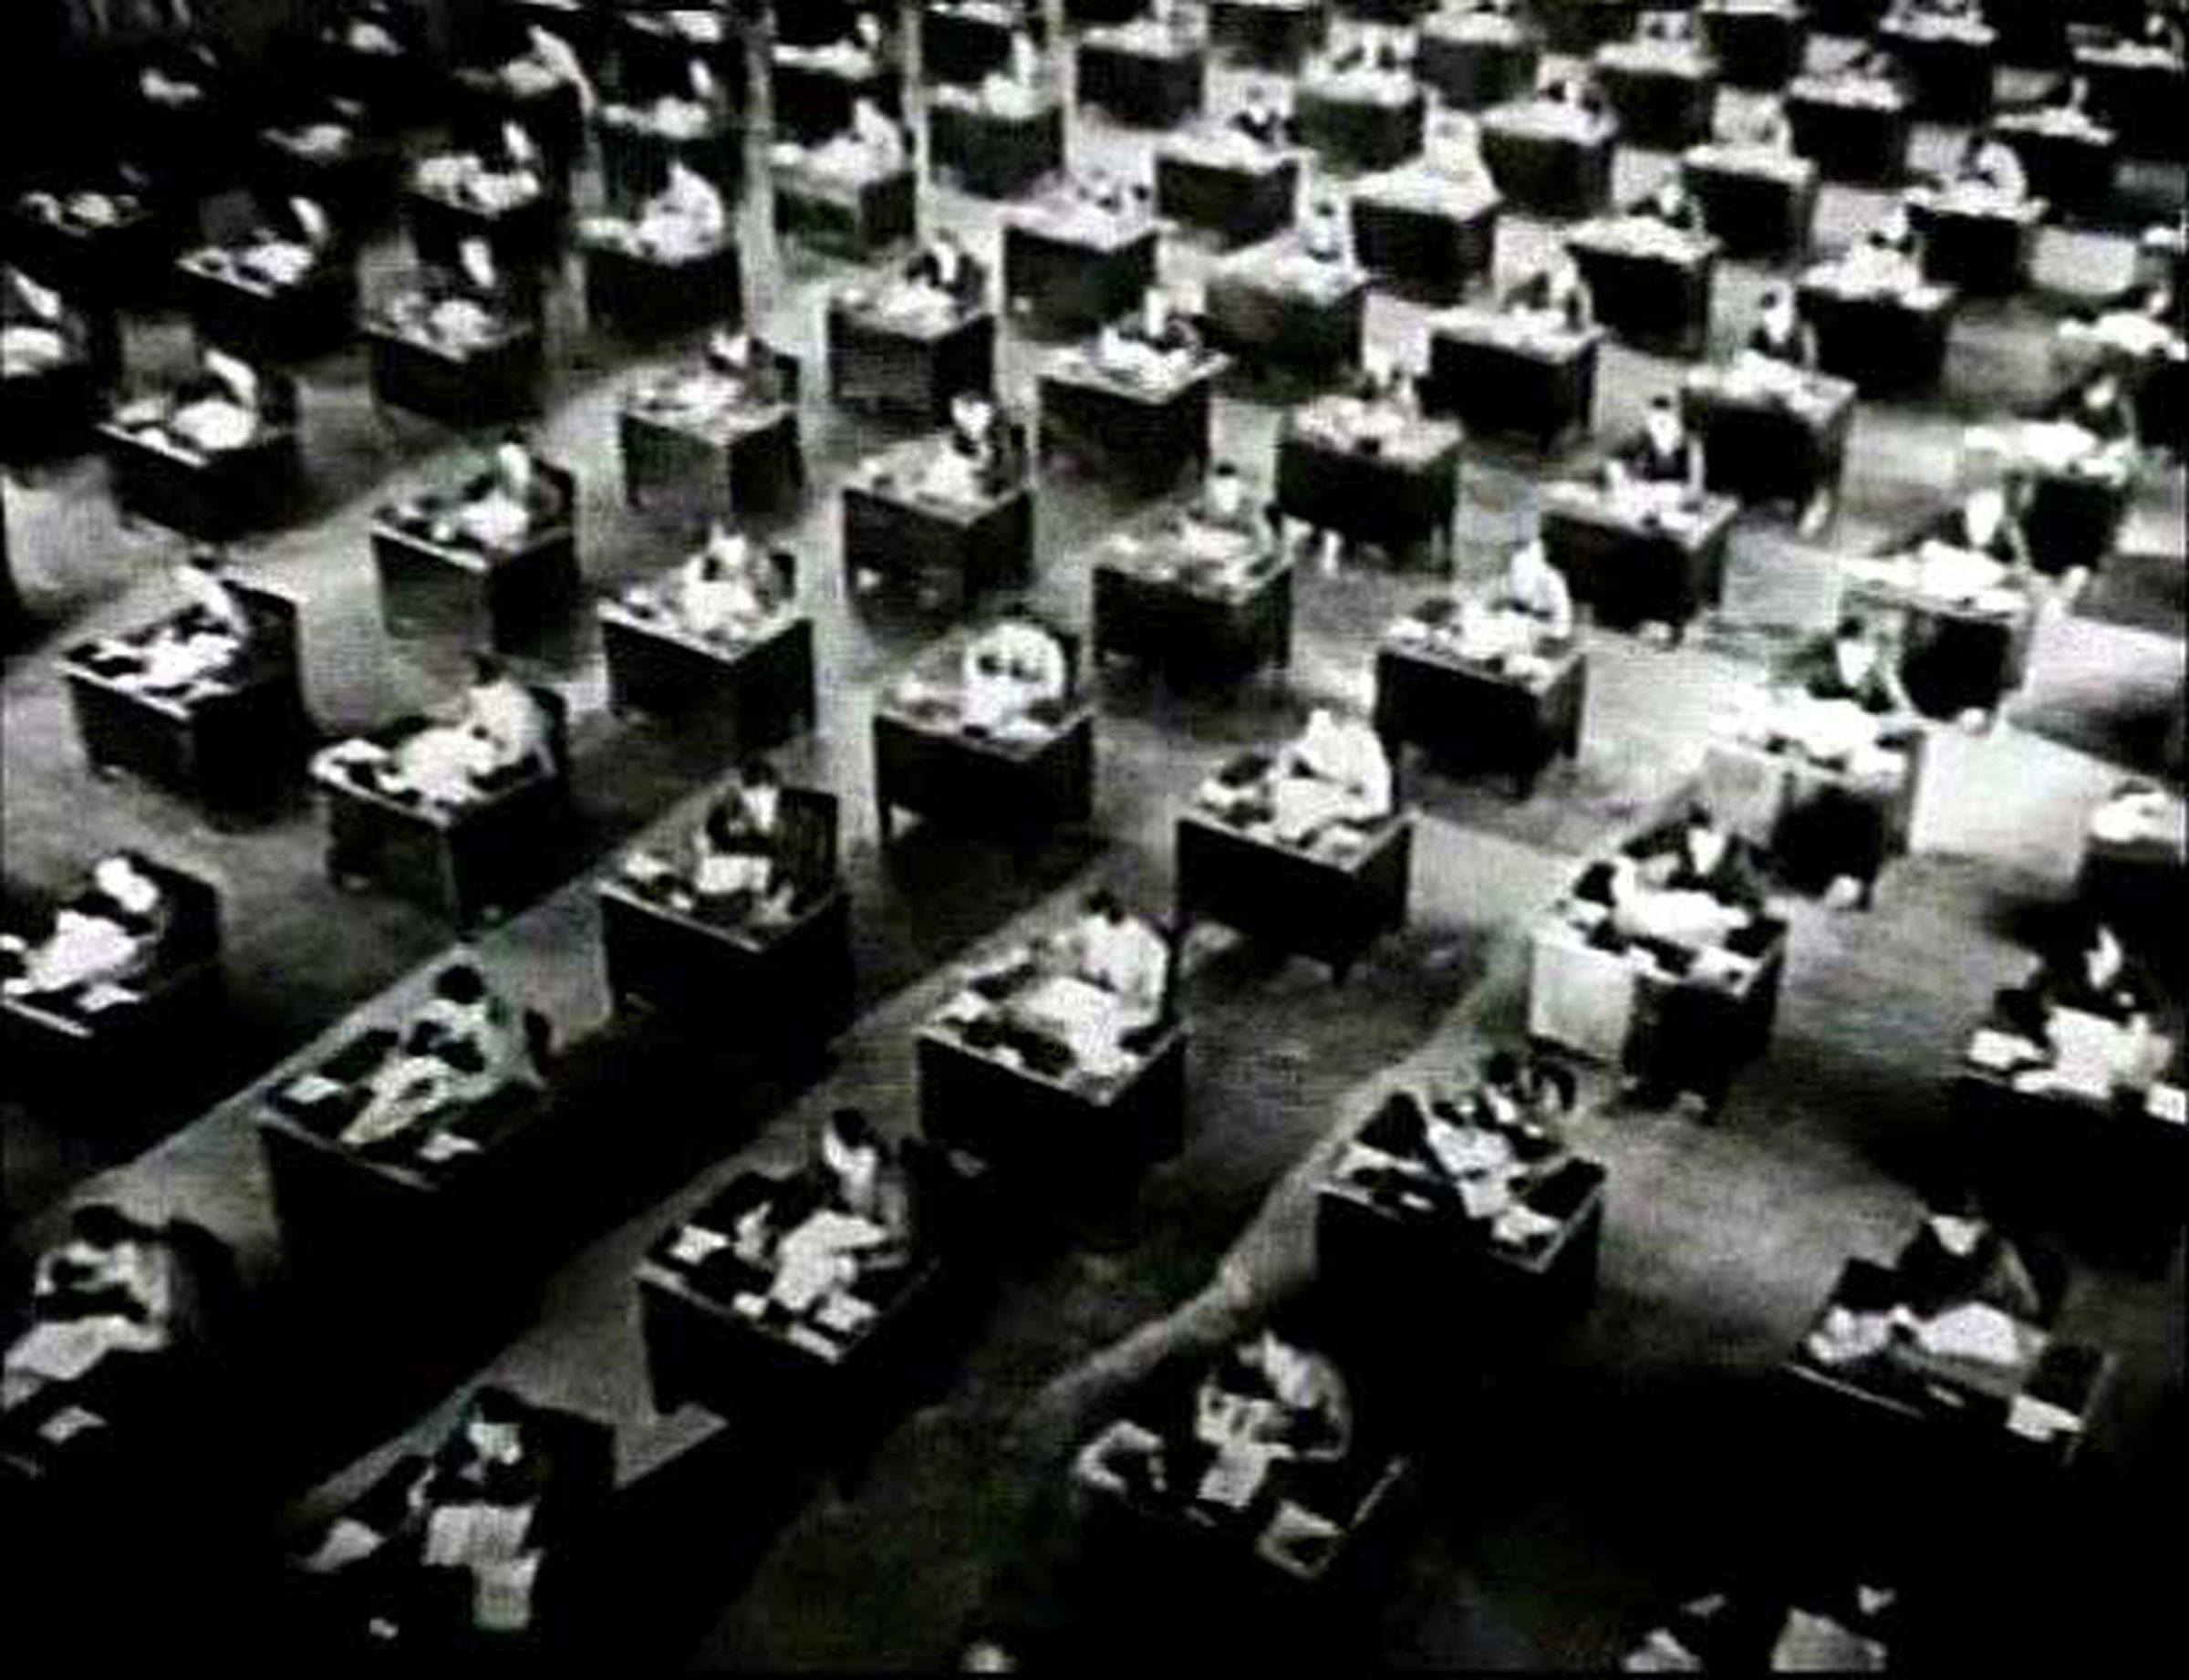 The open office circa 1928, in King Vidor’s classic silent film The Crowd.